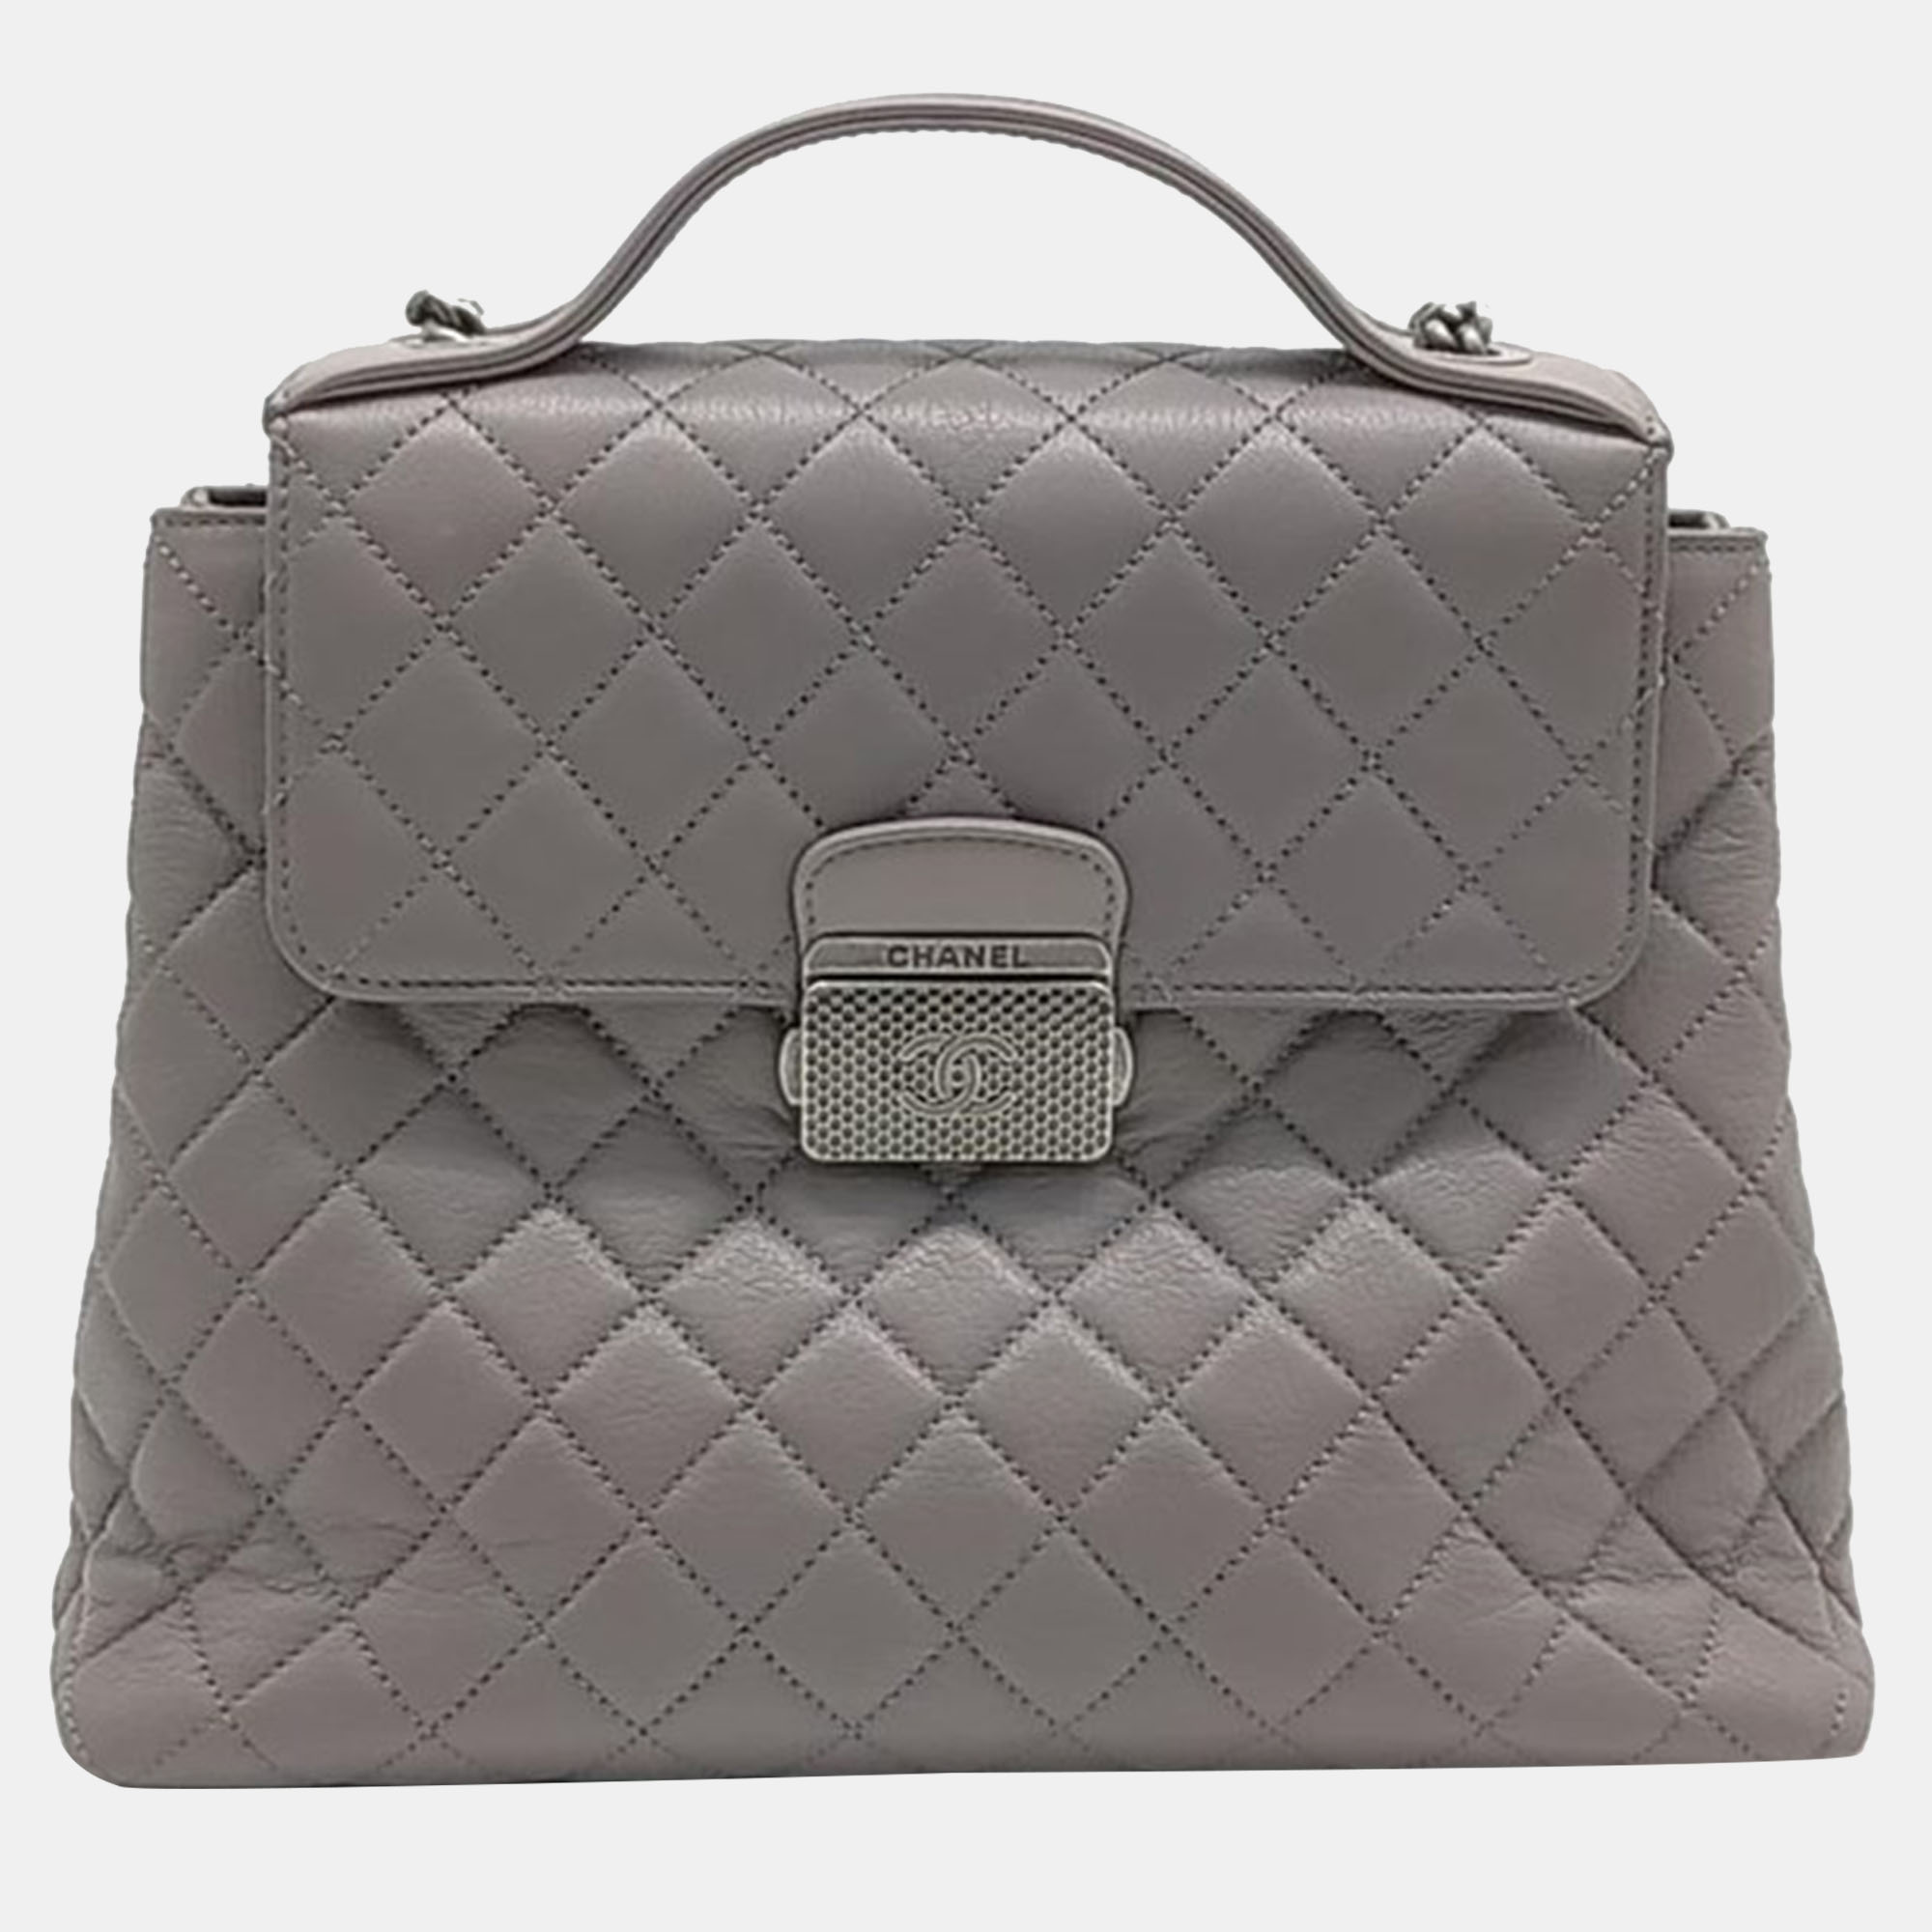 Chanel  purple and grey tone tote and shoulder bag